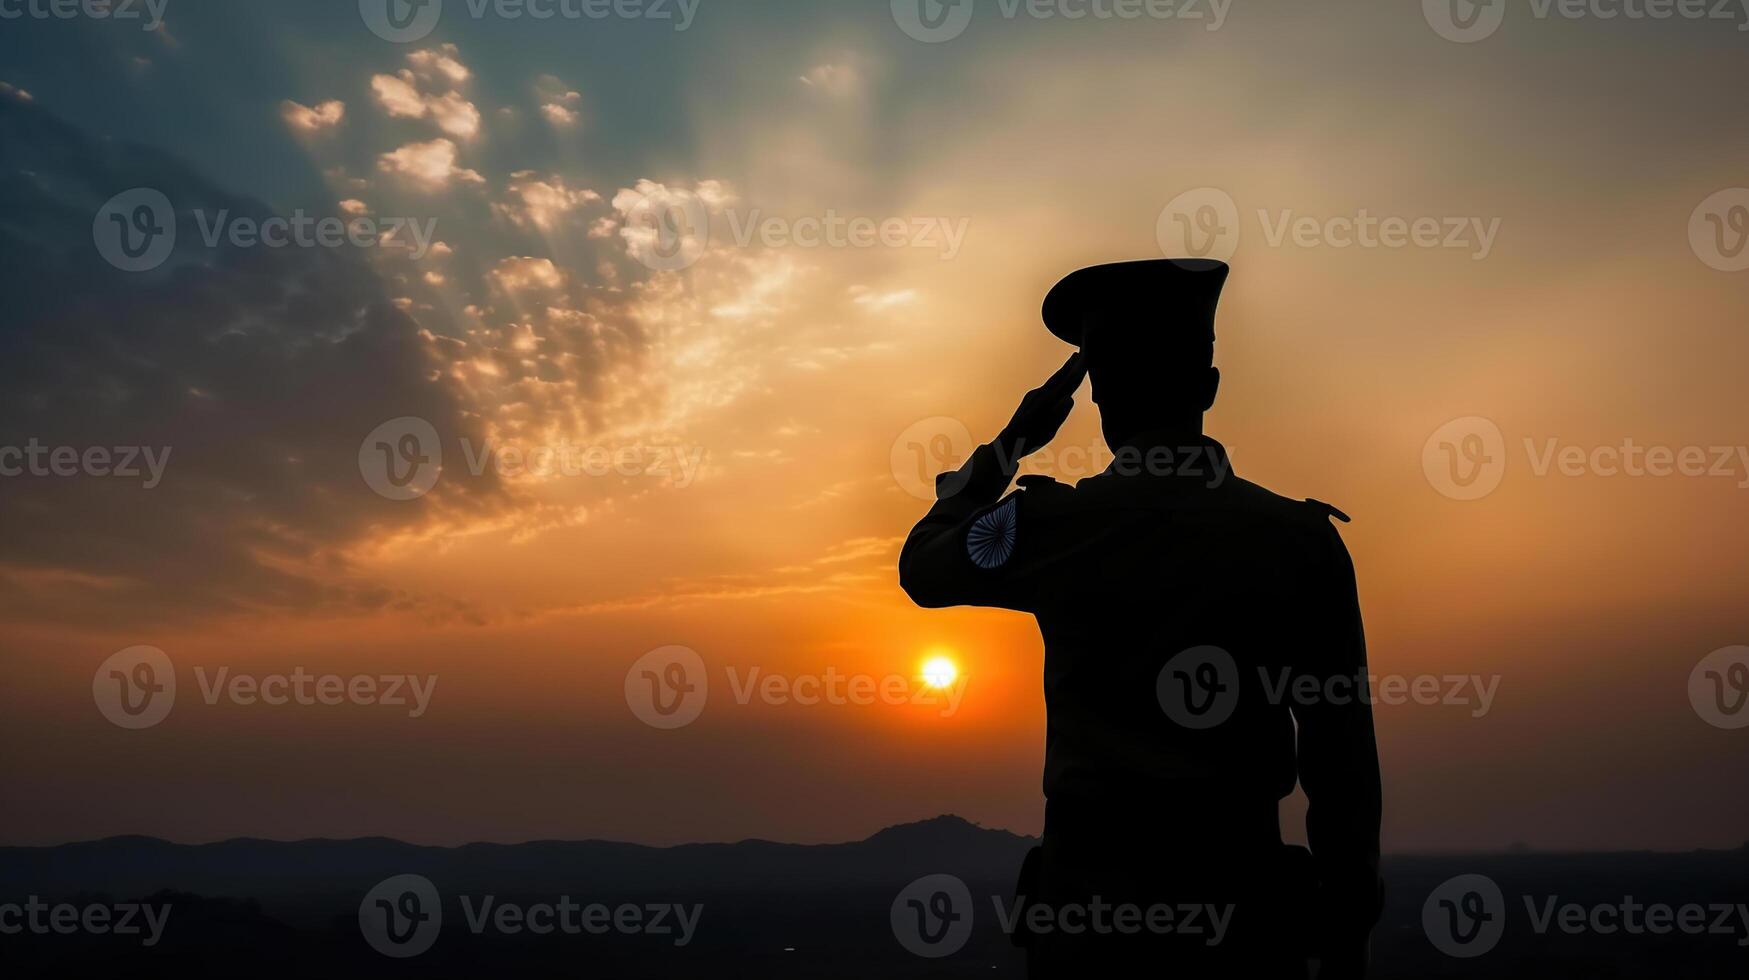 Silhouette of soldier saluting on a background of sunset or the sunrise. Greeting card for Independence day, Republic Day. India celebration, photo